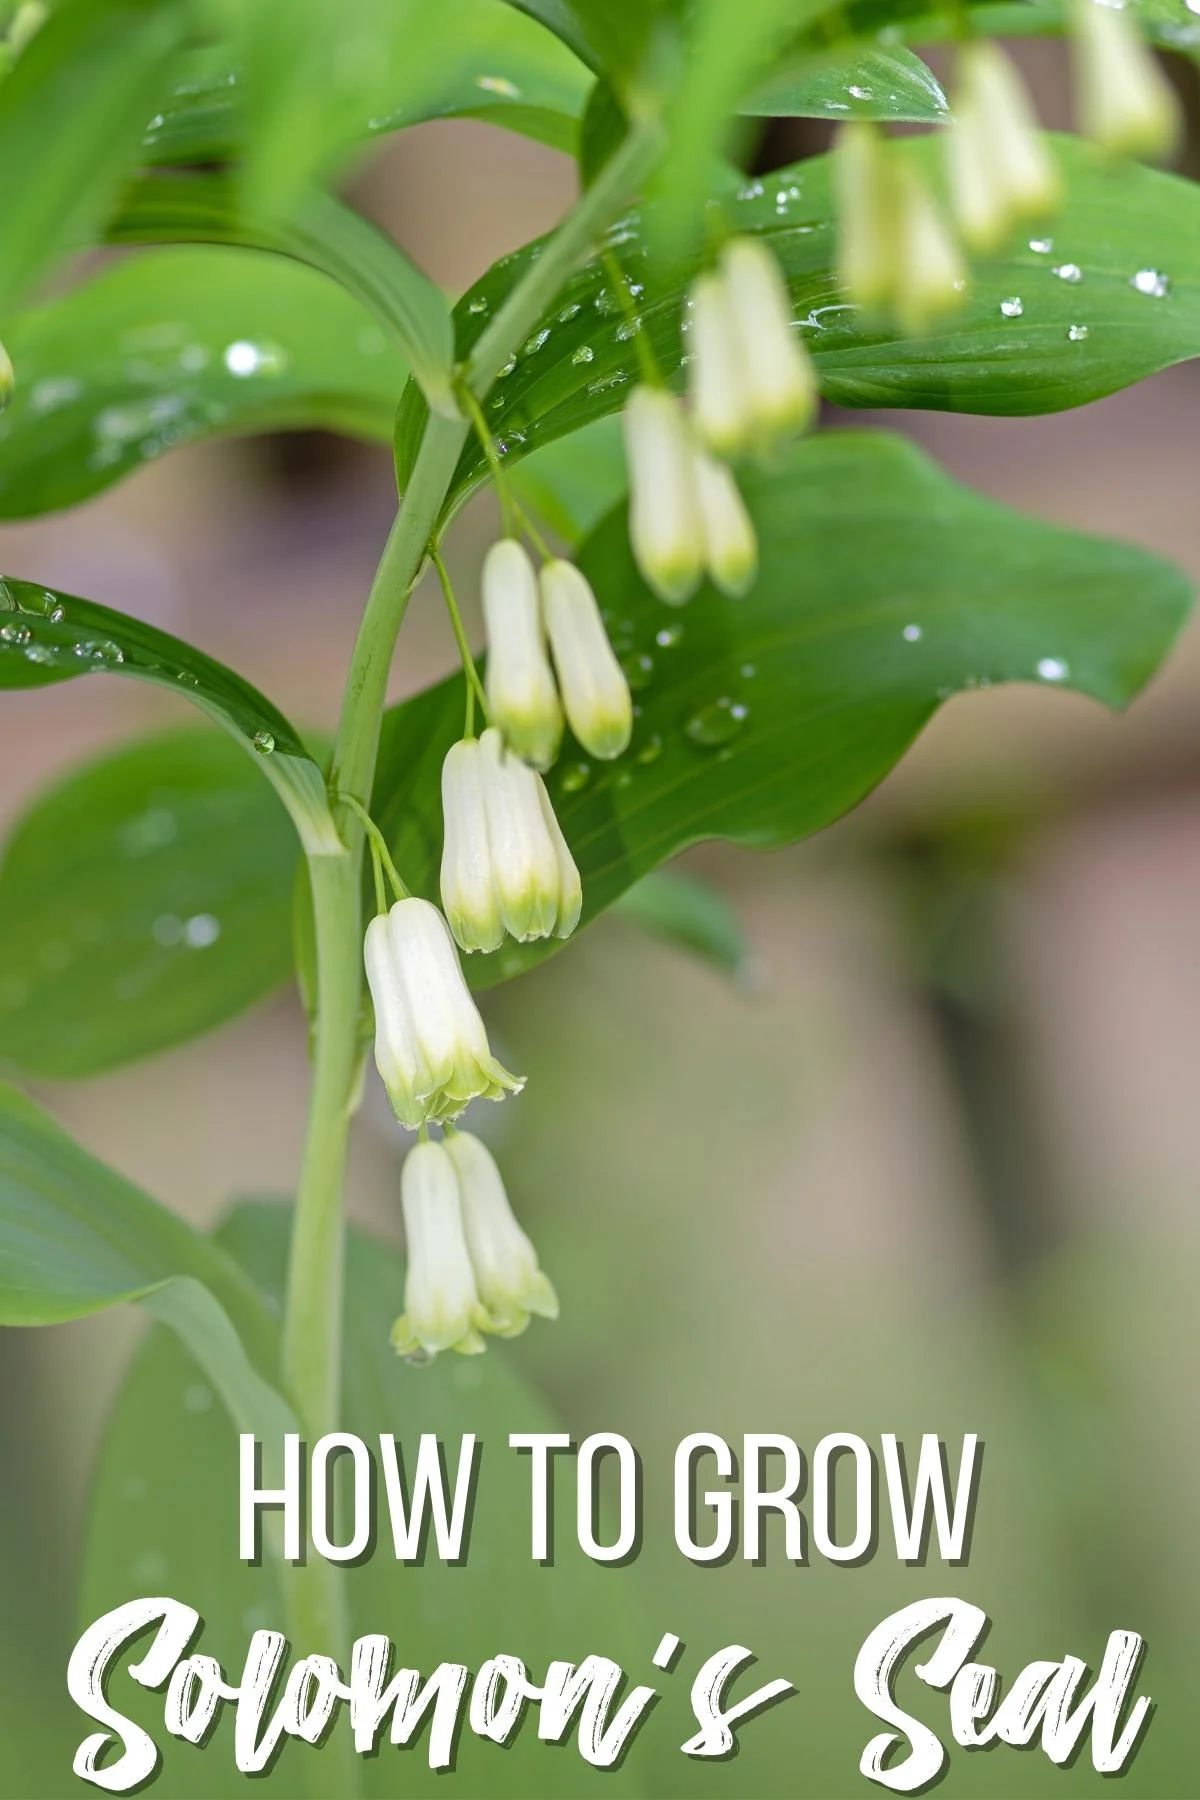 How to Grow and Care for Lily of the Valley